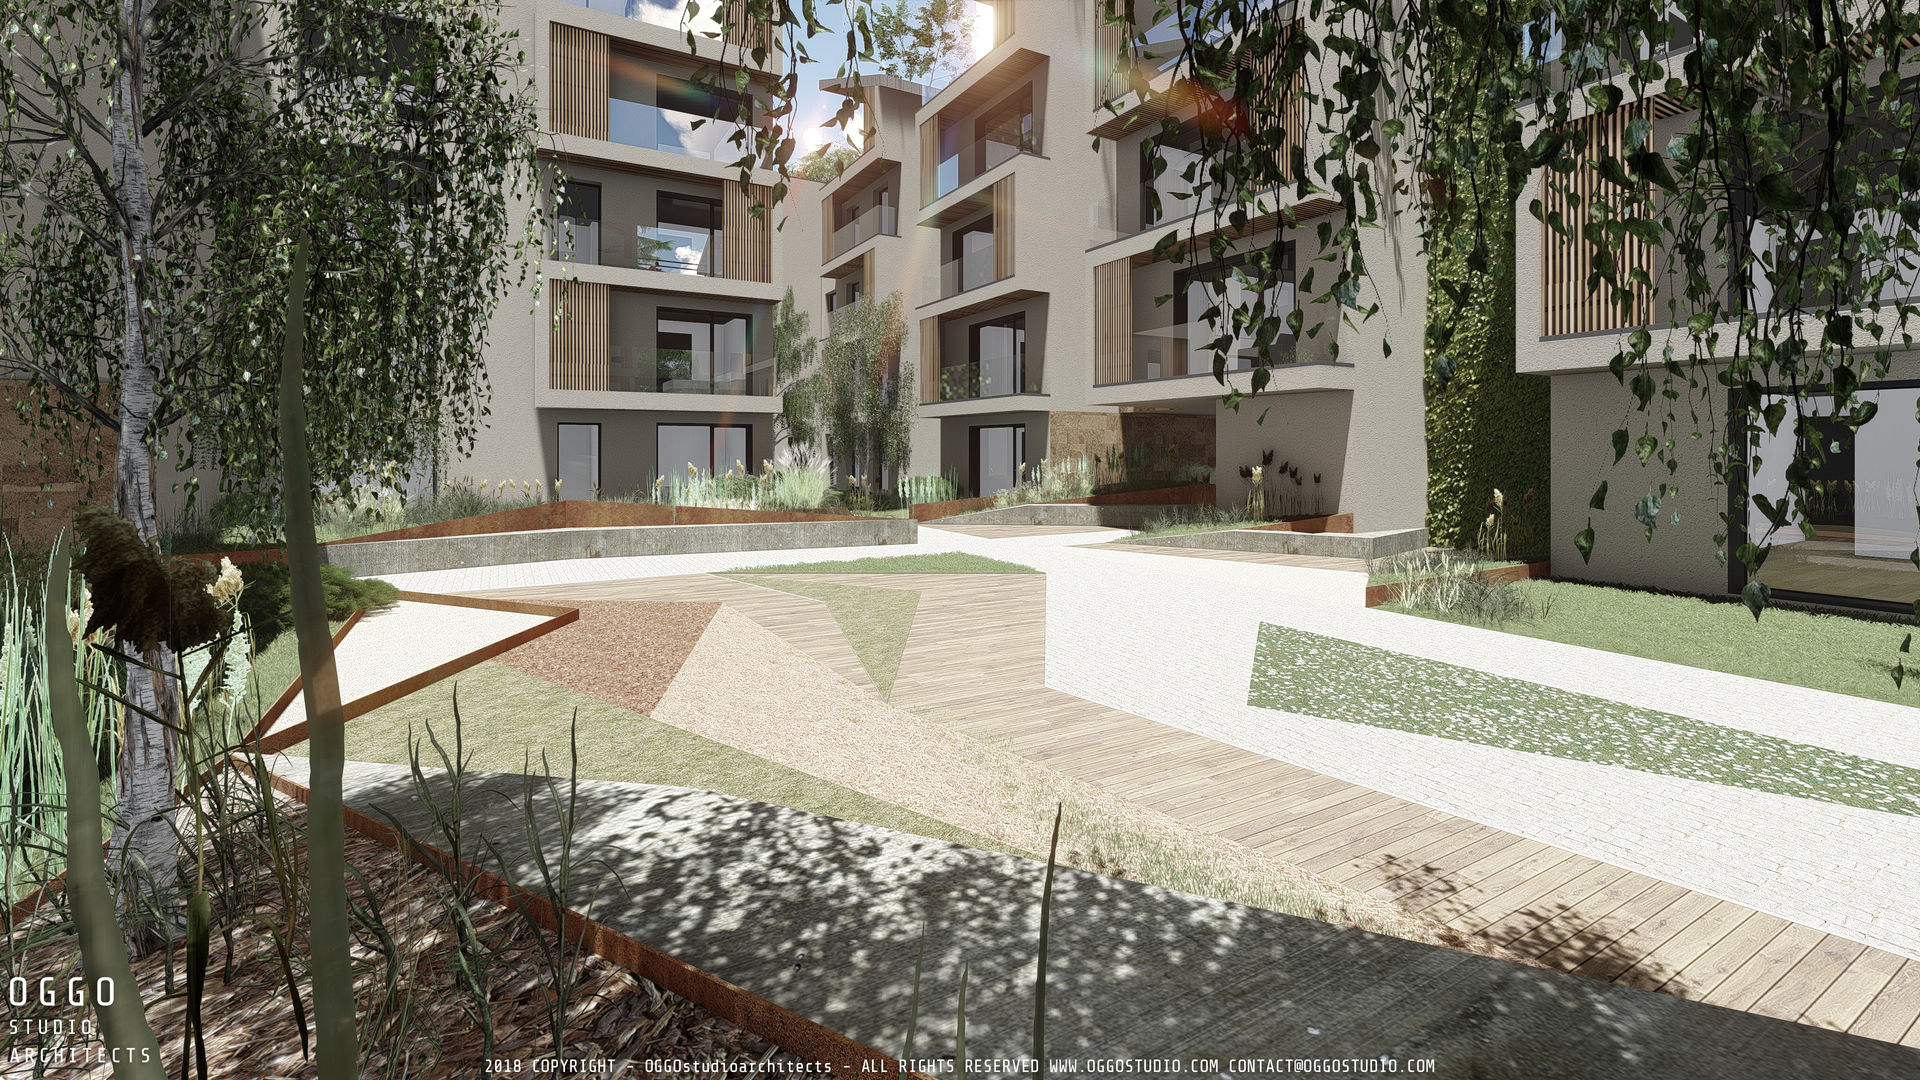 Housing project of 120 apartments OGGOstudioarchitects, unipessoal lda Garden Romainville,Collective housing,square,green,wood